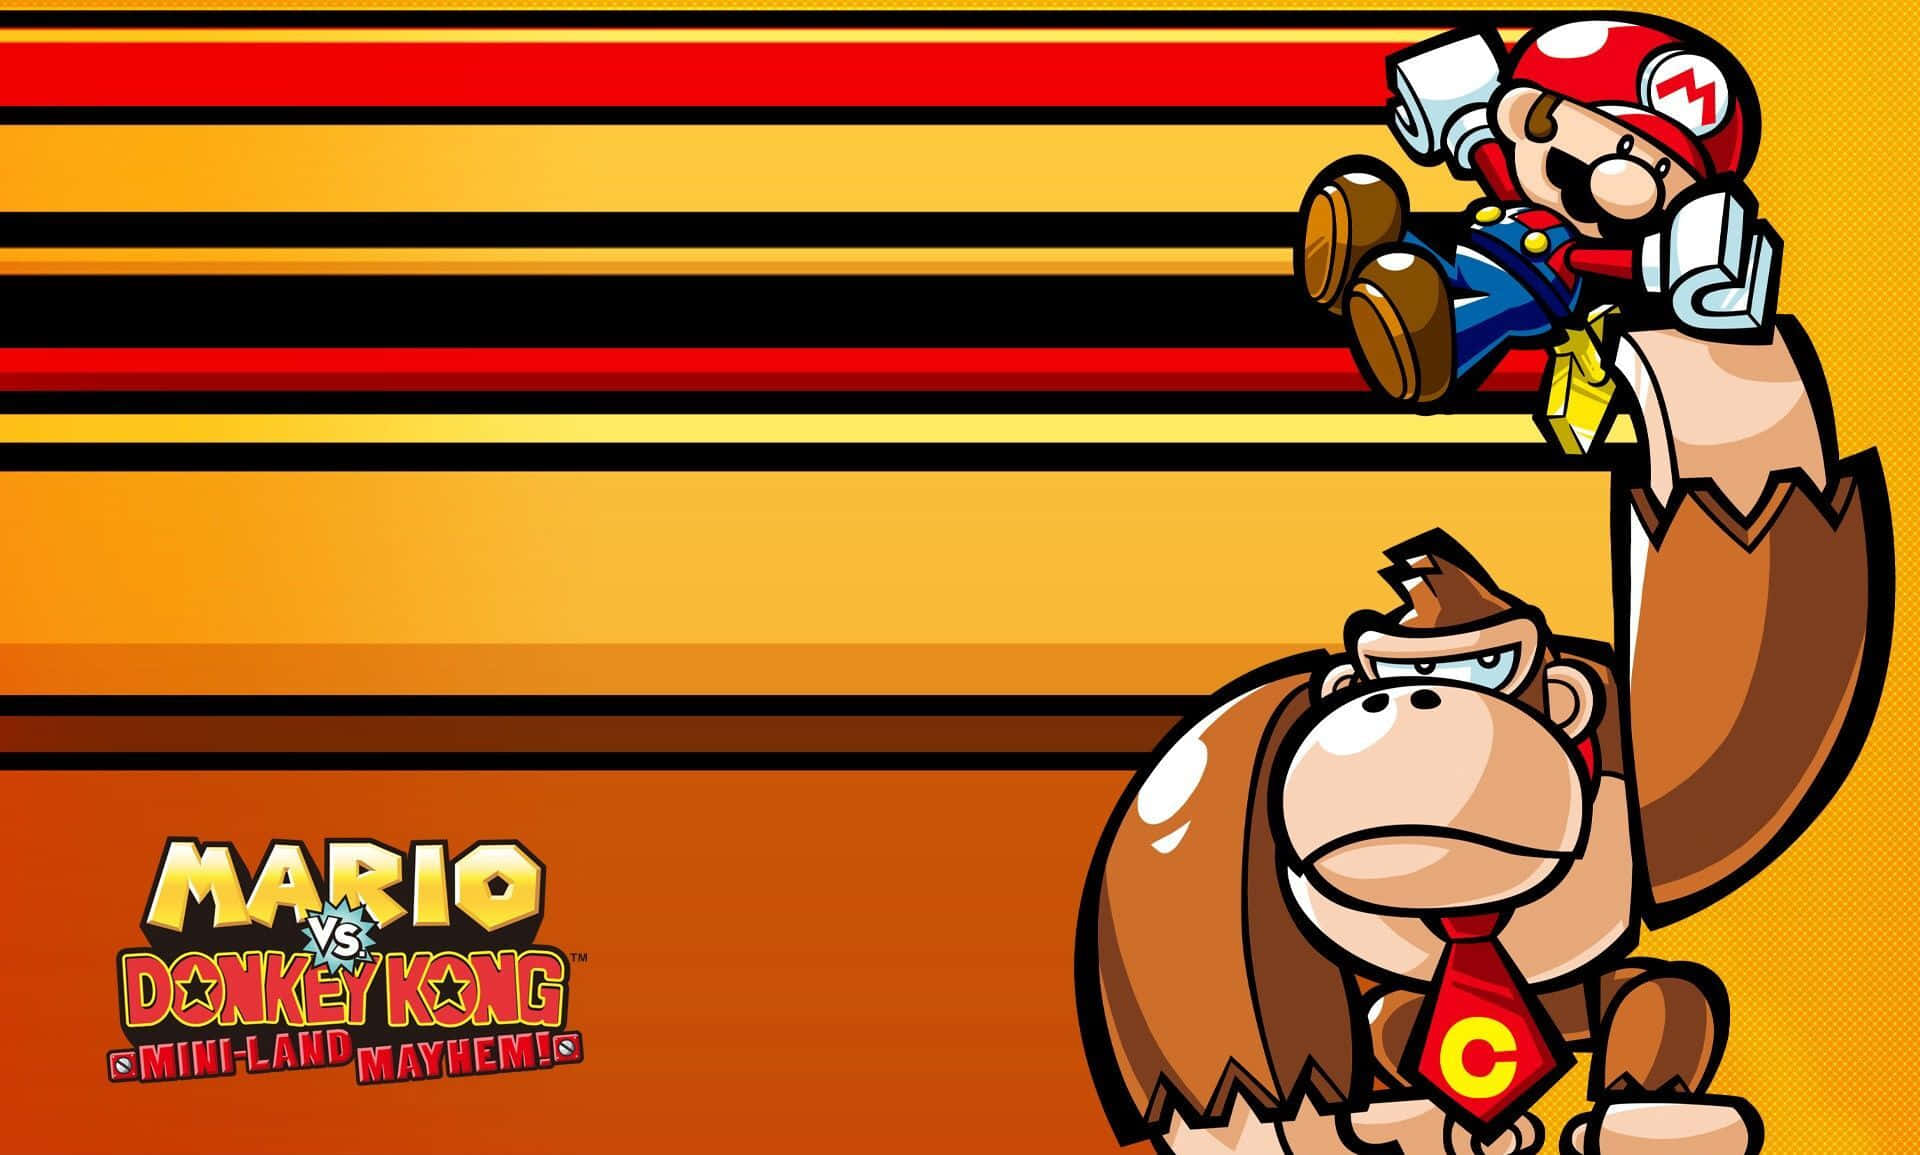 Donkey Kong Dominating The Game In A Thrilling Action-packed Scene Background